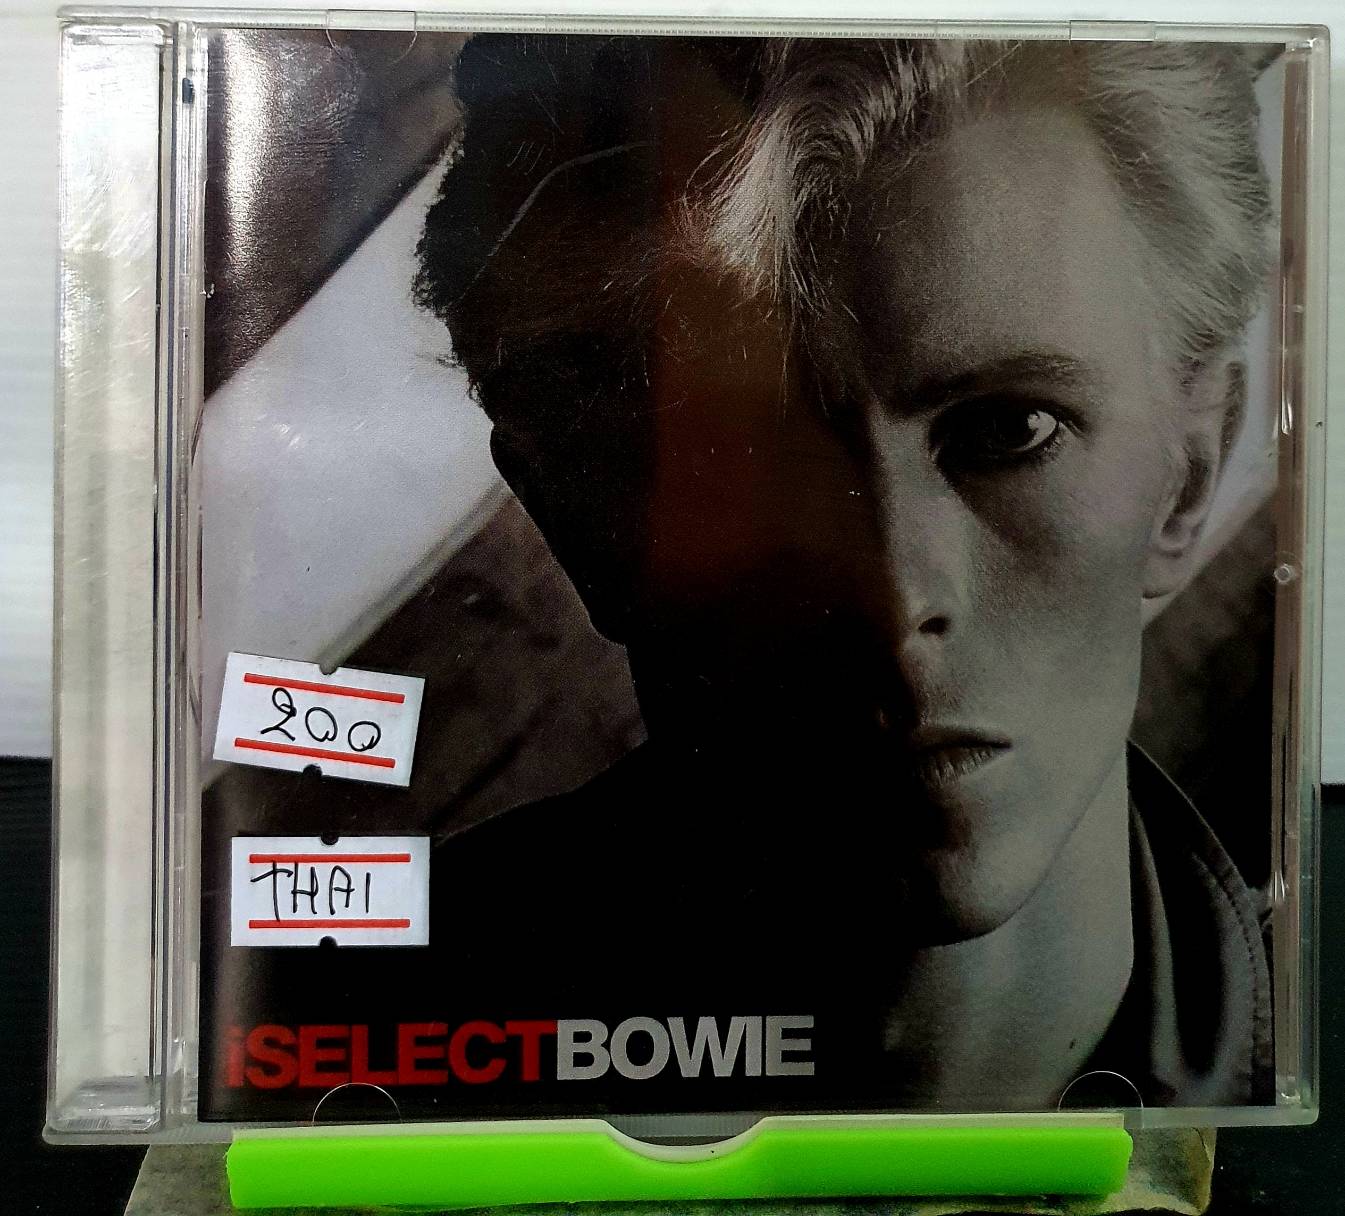 CD ISELECTBOWIE BY DAVID BOWIE MADE IN THAI